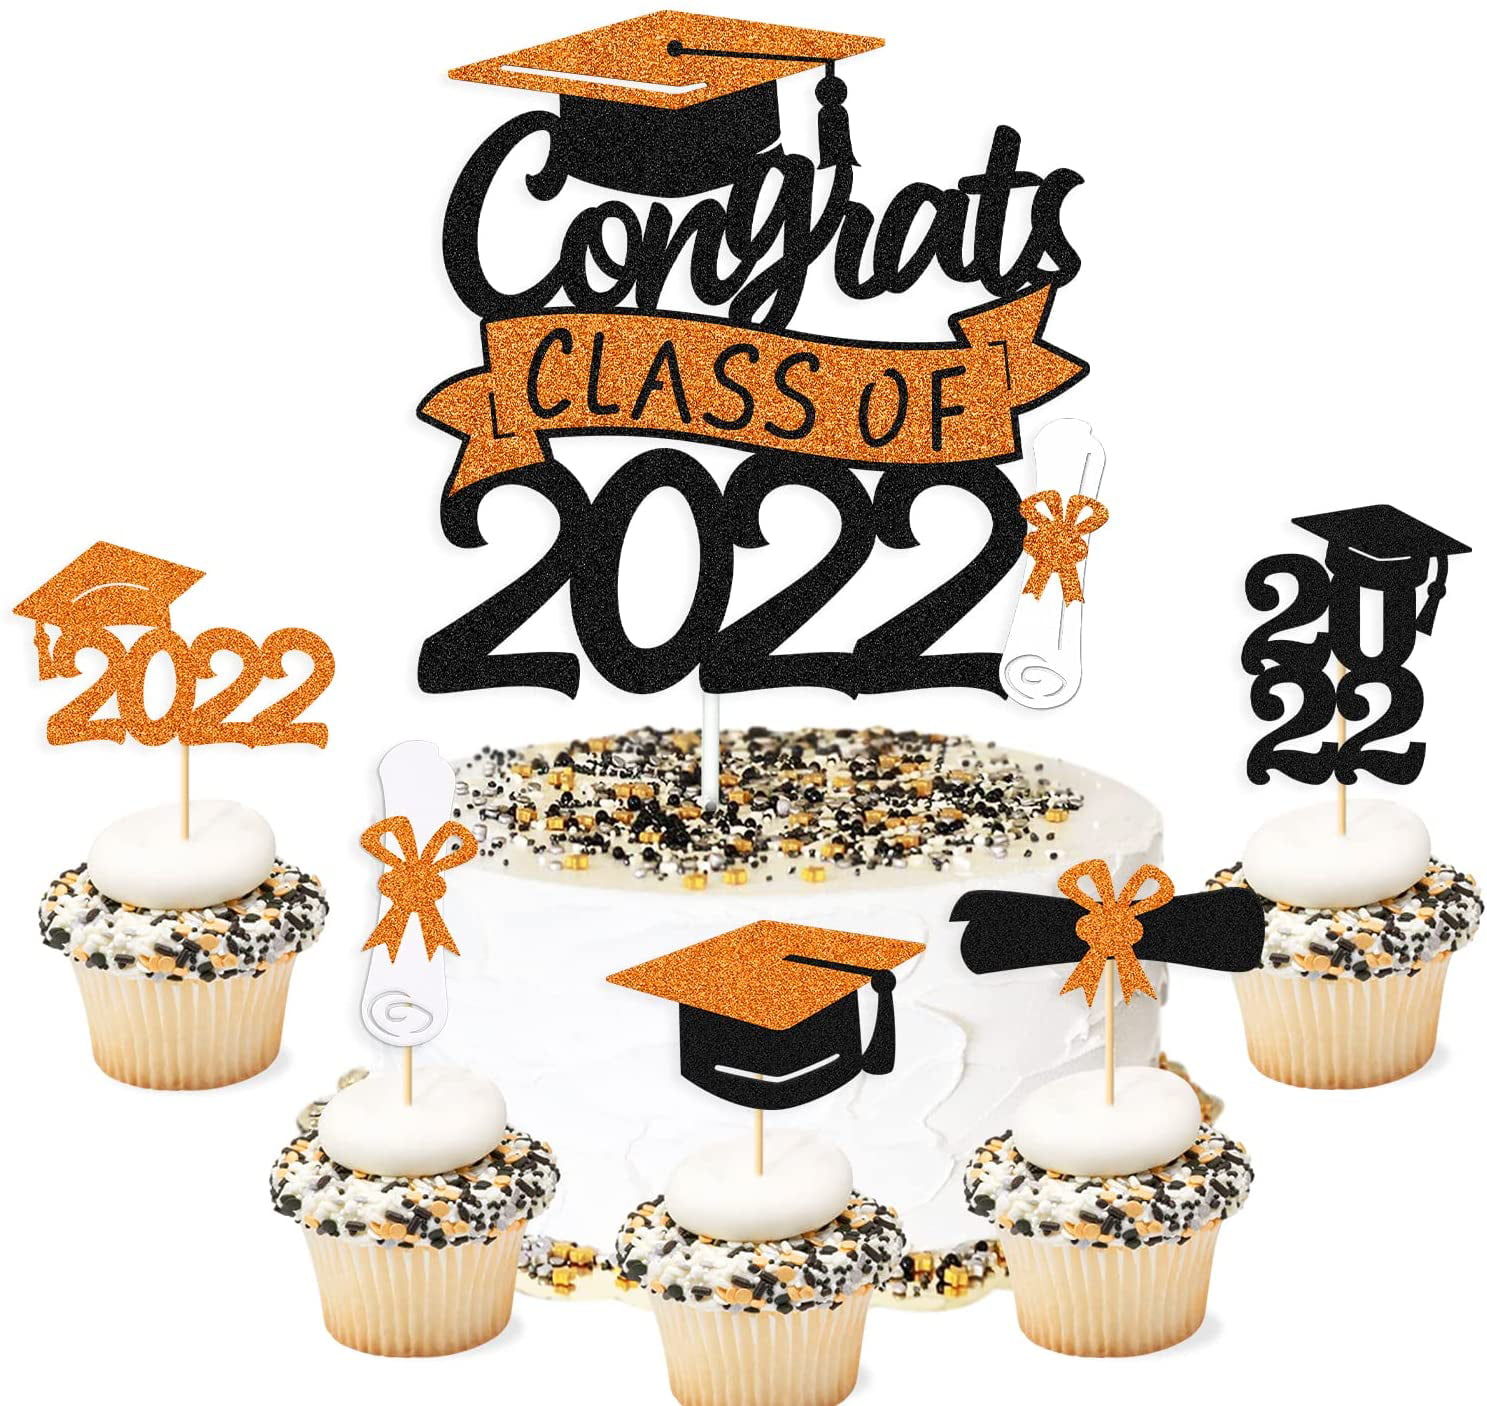 24 Pack Blue Glitter Class of 2022 Grad Cap Diploma Cake Picks for 2022 Graduation Themed Party Decorations 2022 Graduation Cupcake Toppers 